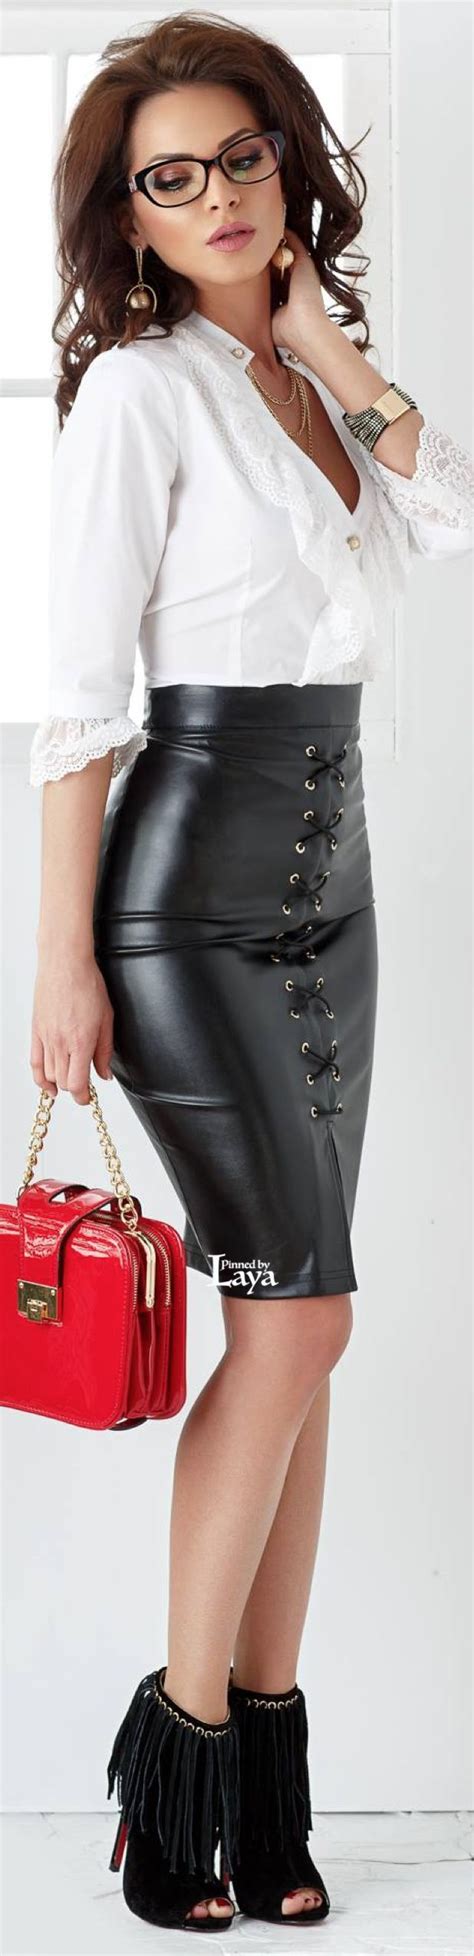 25 Best Ideas About Sexy Leather On Pinterest Leather Outfits Black